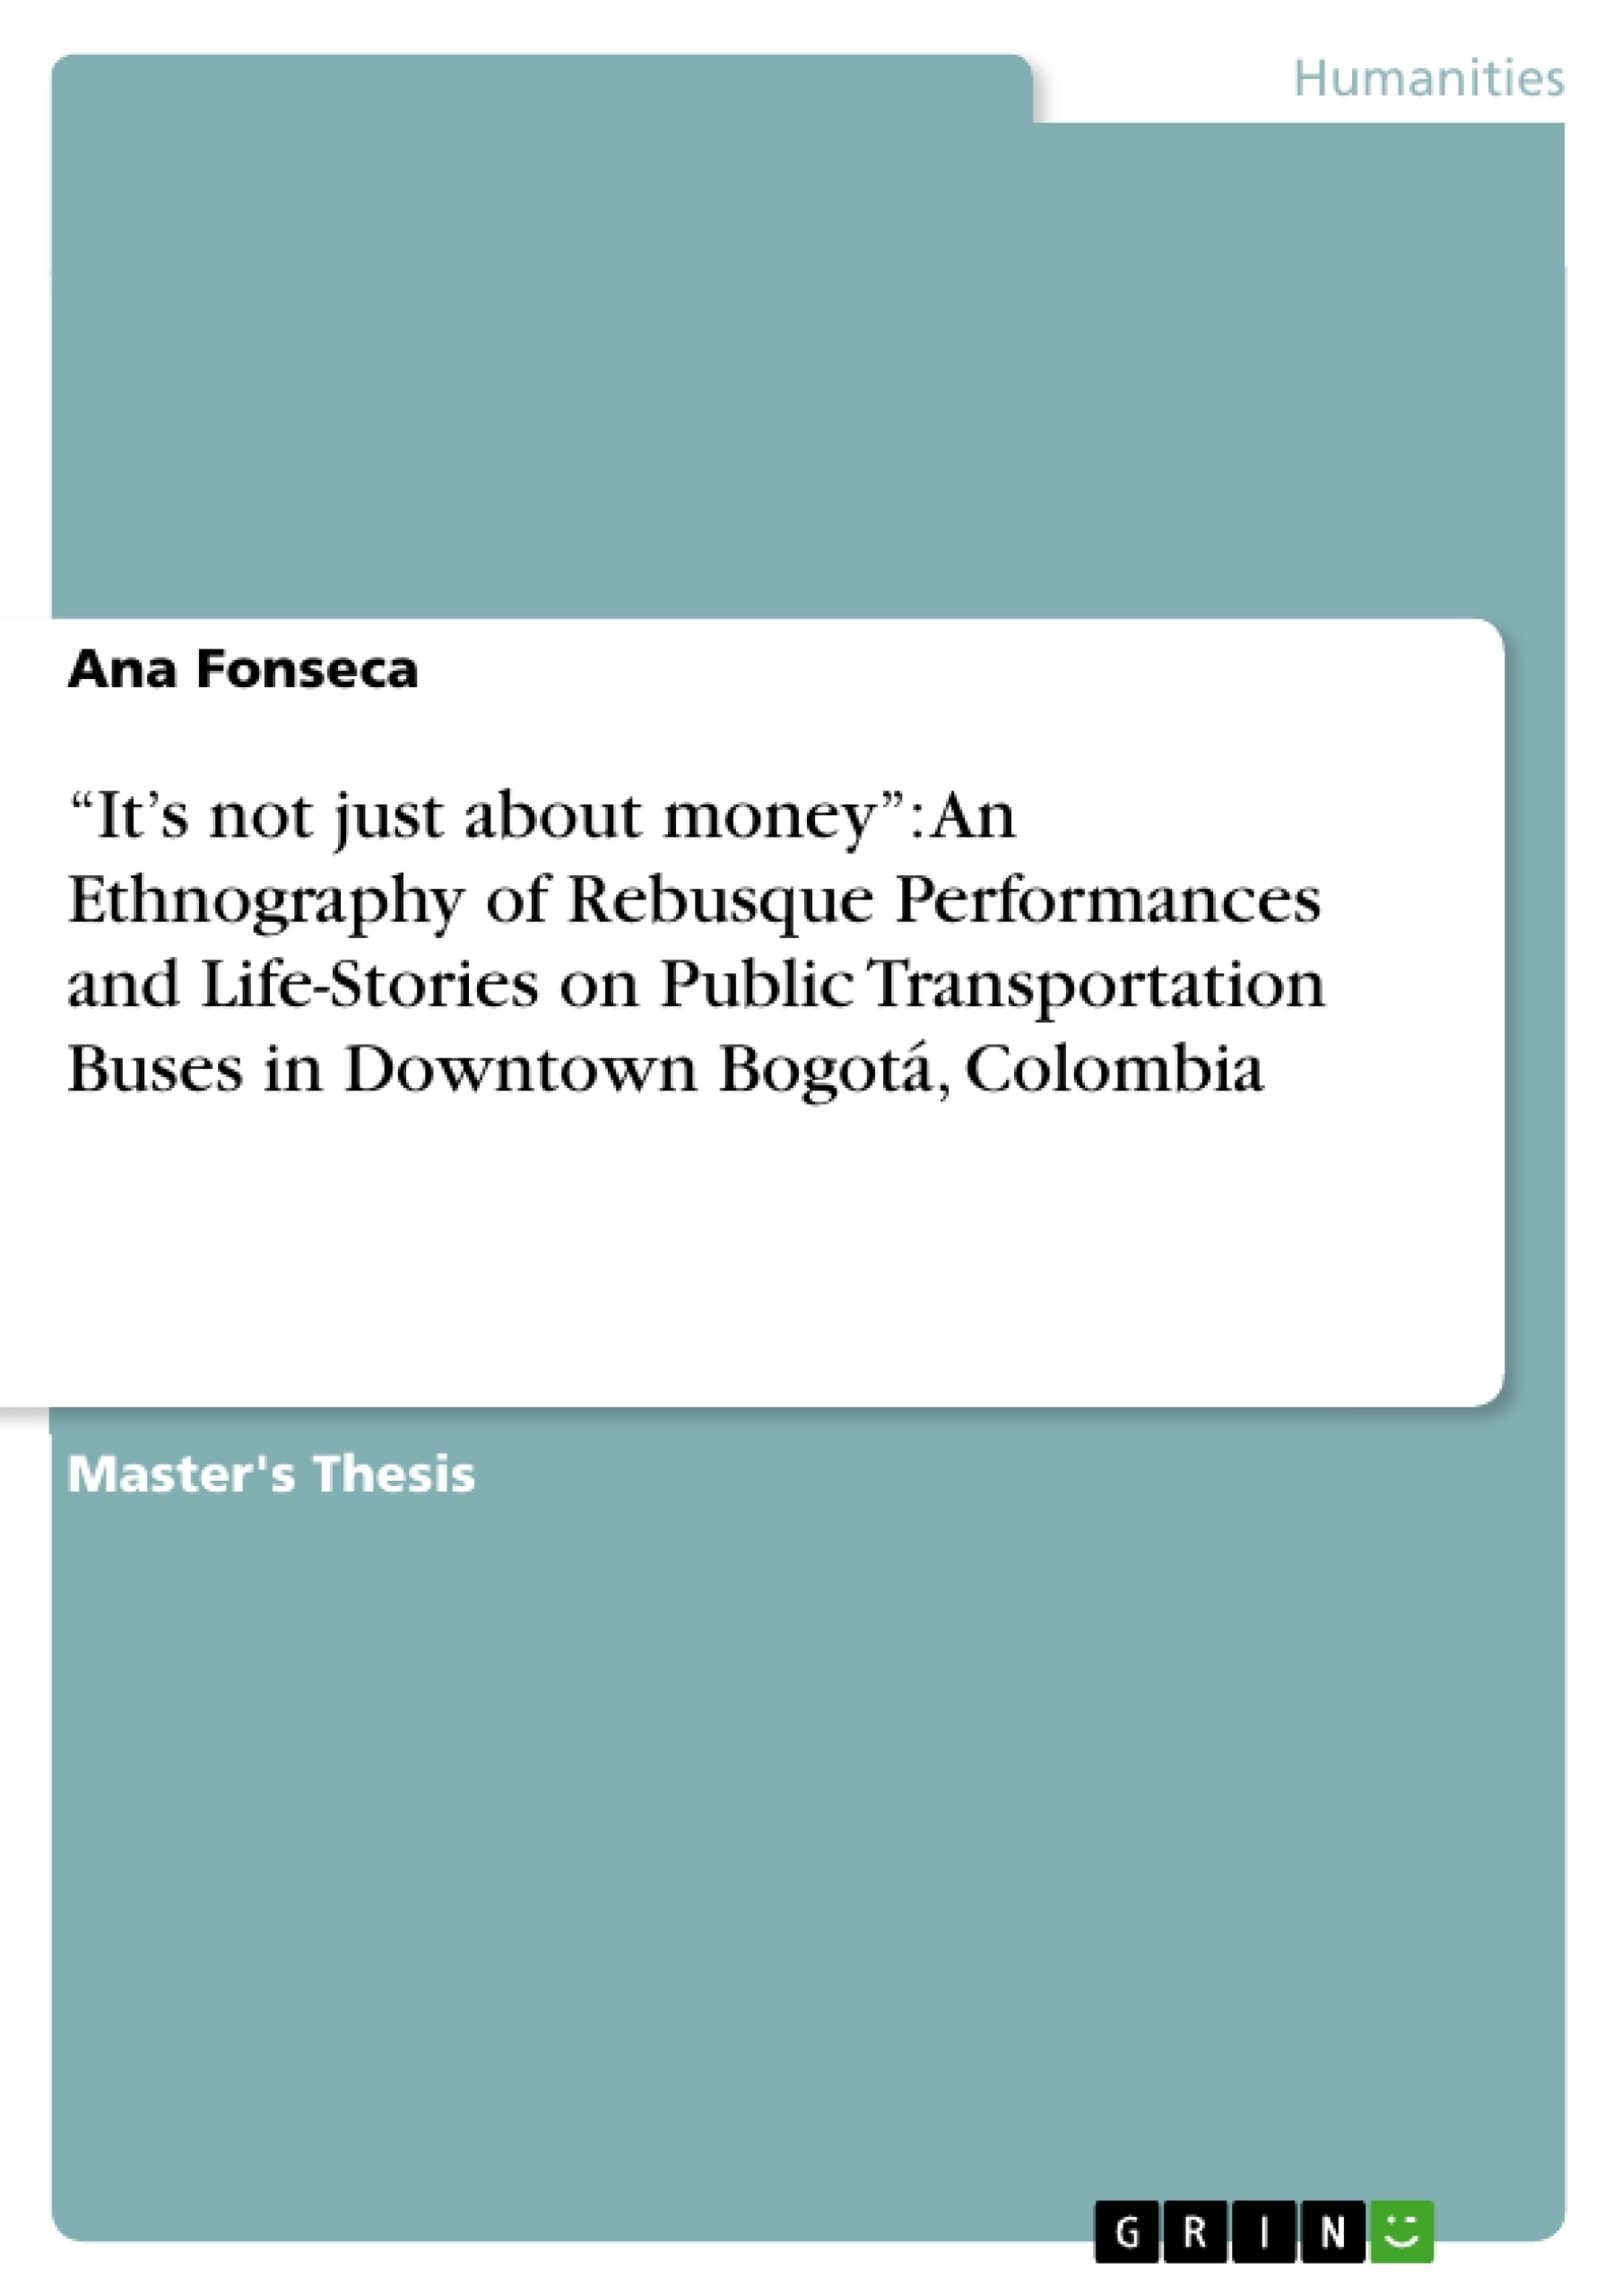 Título: “It’s not just about money”: An Ethnography of Rebusque Performances and Life-Stories on Public Transportation Buses in Downtown Bogotá, Colombia